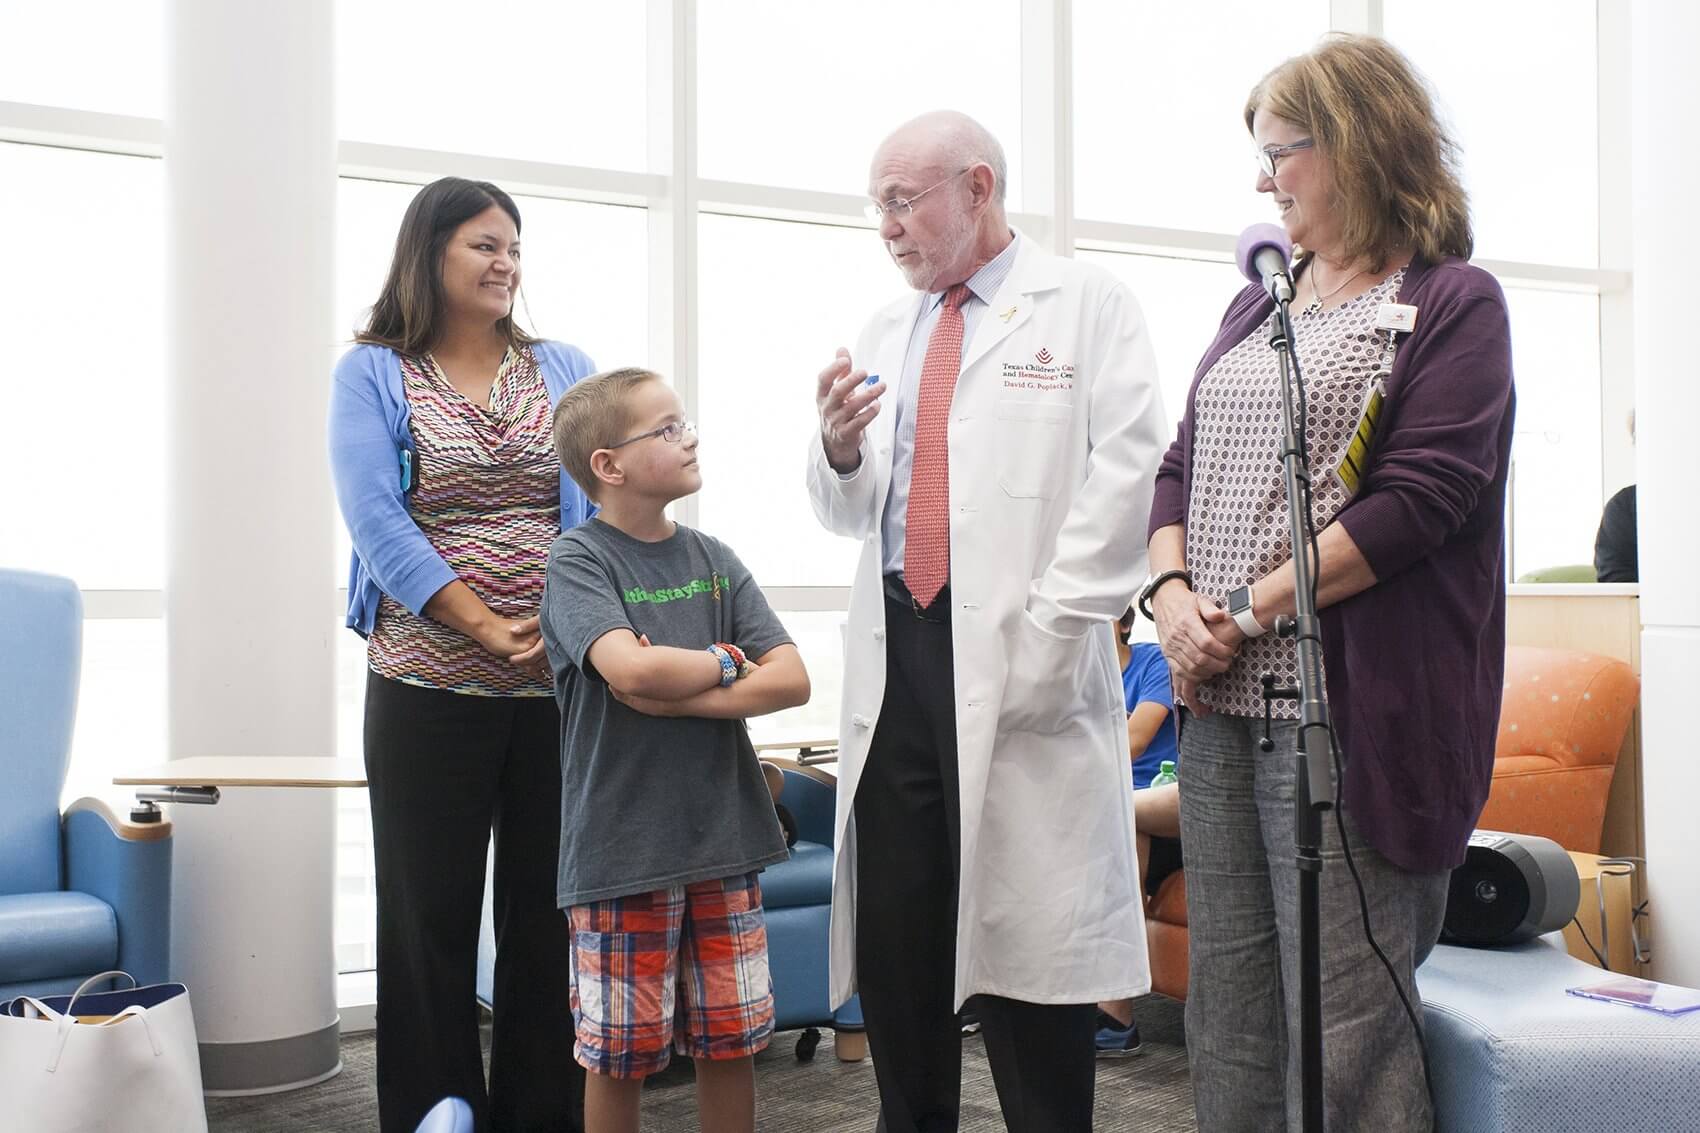 Ethan Williamson and his mom, Tiffany, are introduced by Dr. David Poplack, director of Texas Children’s Cancer and Hematology Centers, and Judy Holloway, assistant director of nursing at Texas Children’s Cancer Center. (Credit: John R. Lewis Photography)